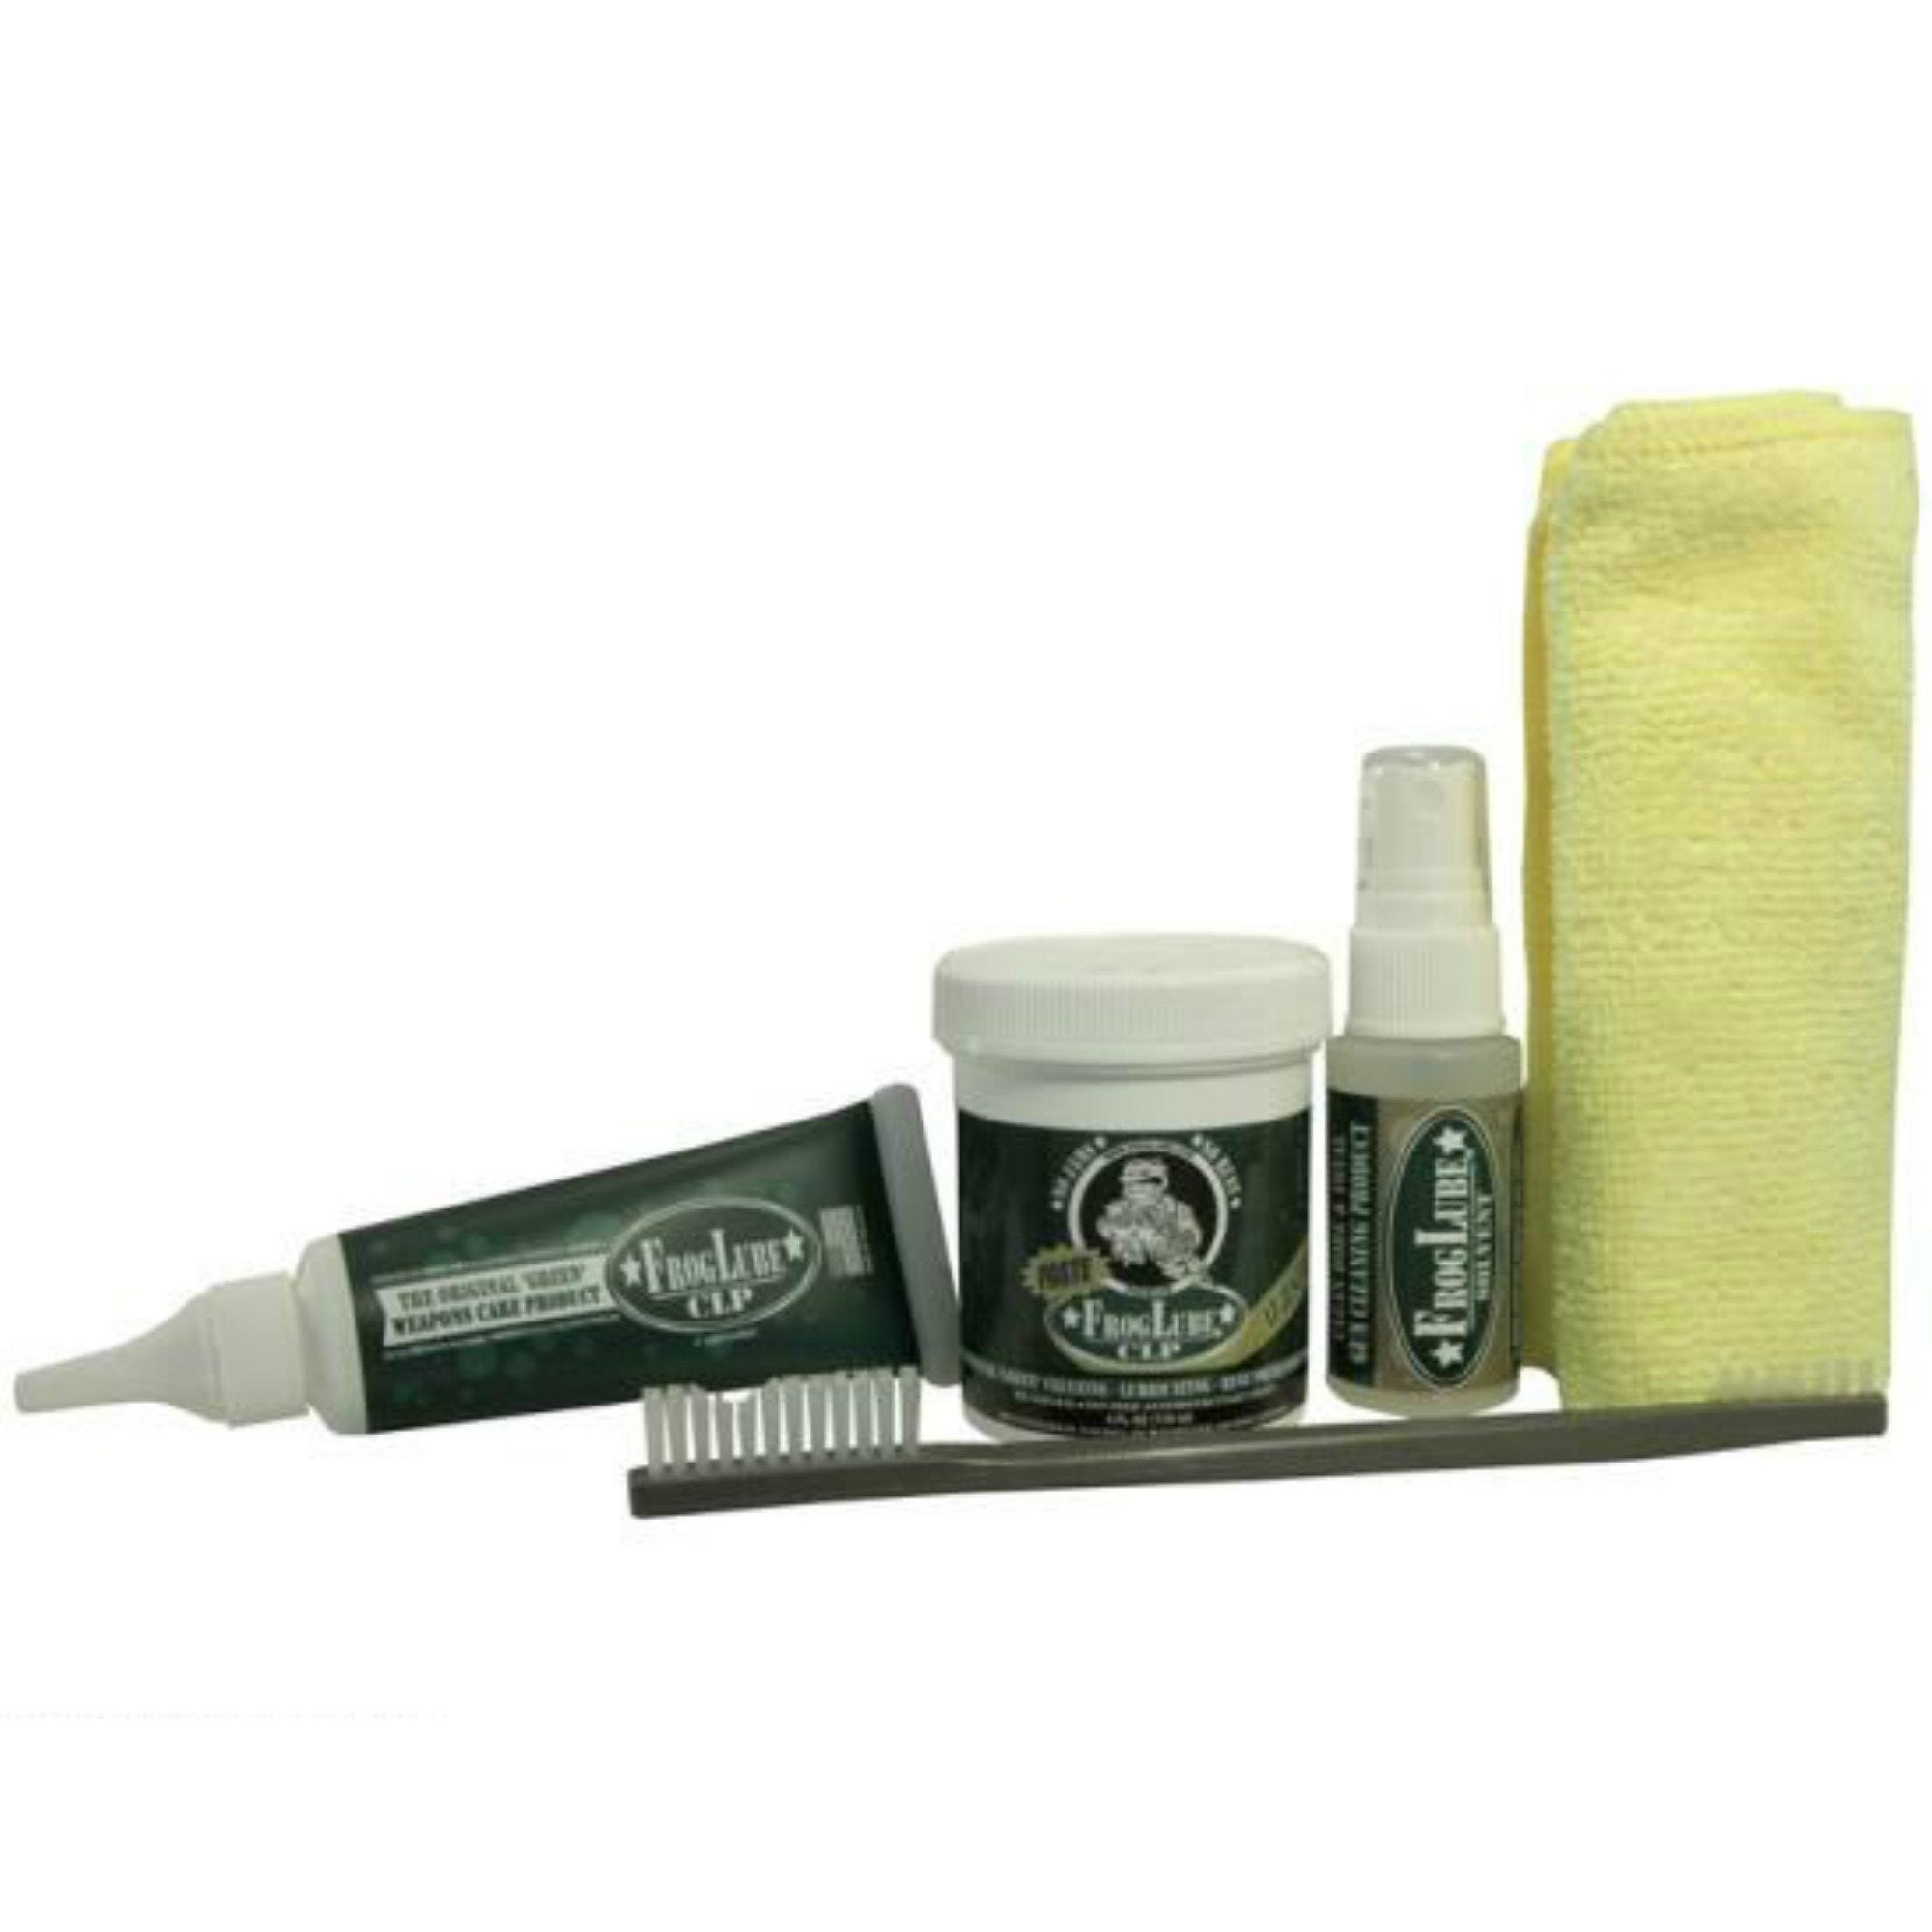 Froglube Cleaning Kit